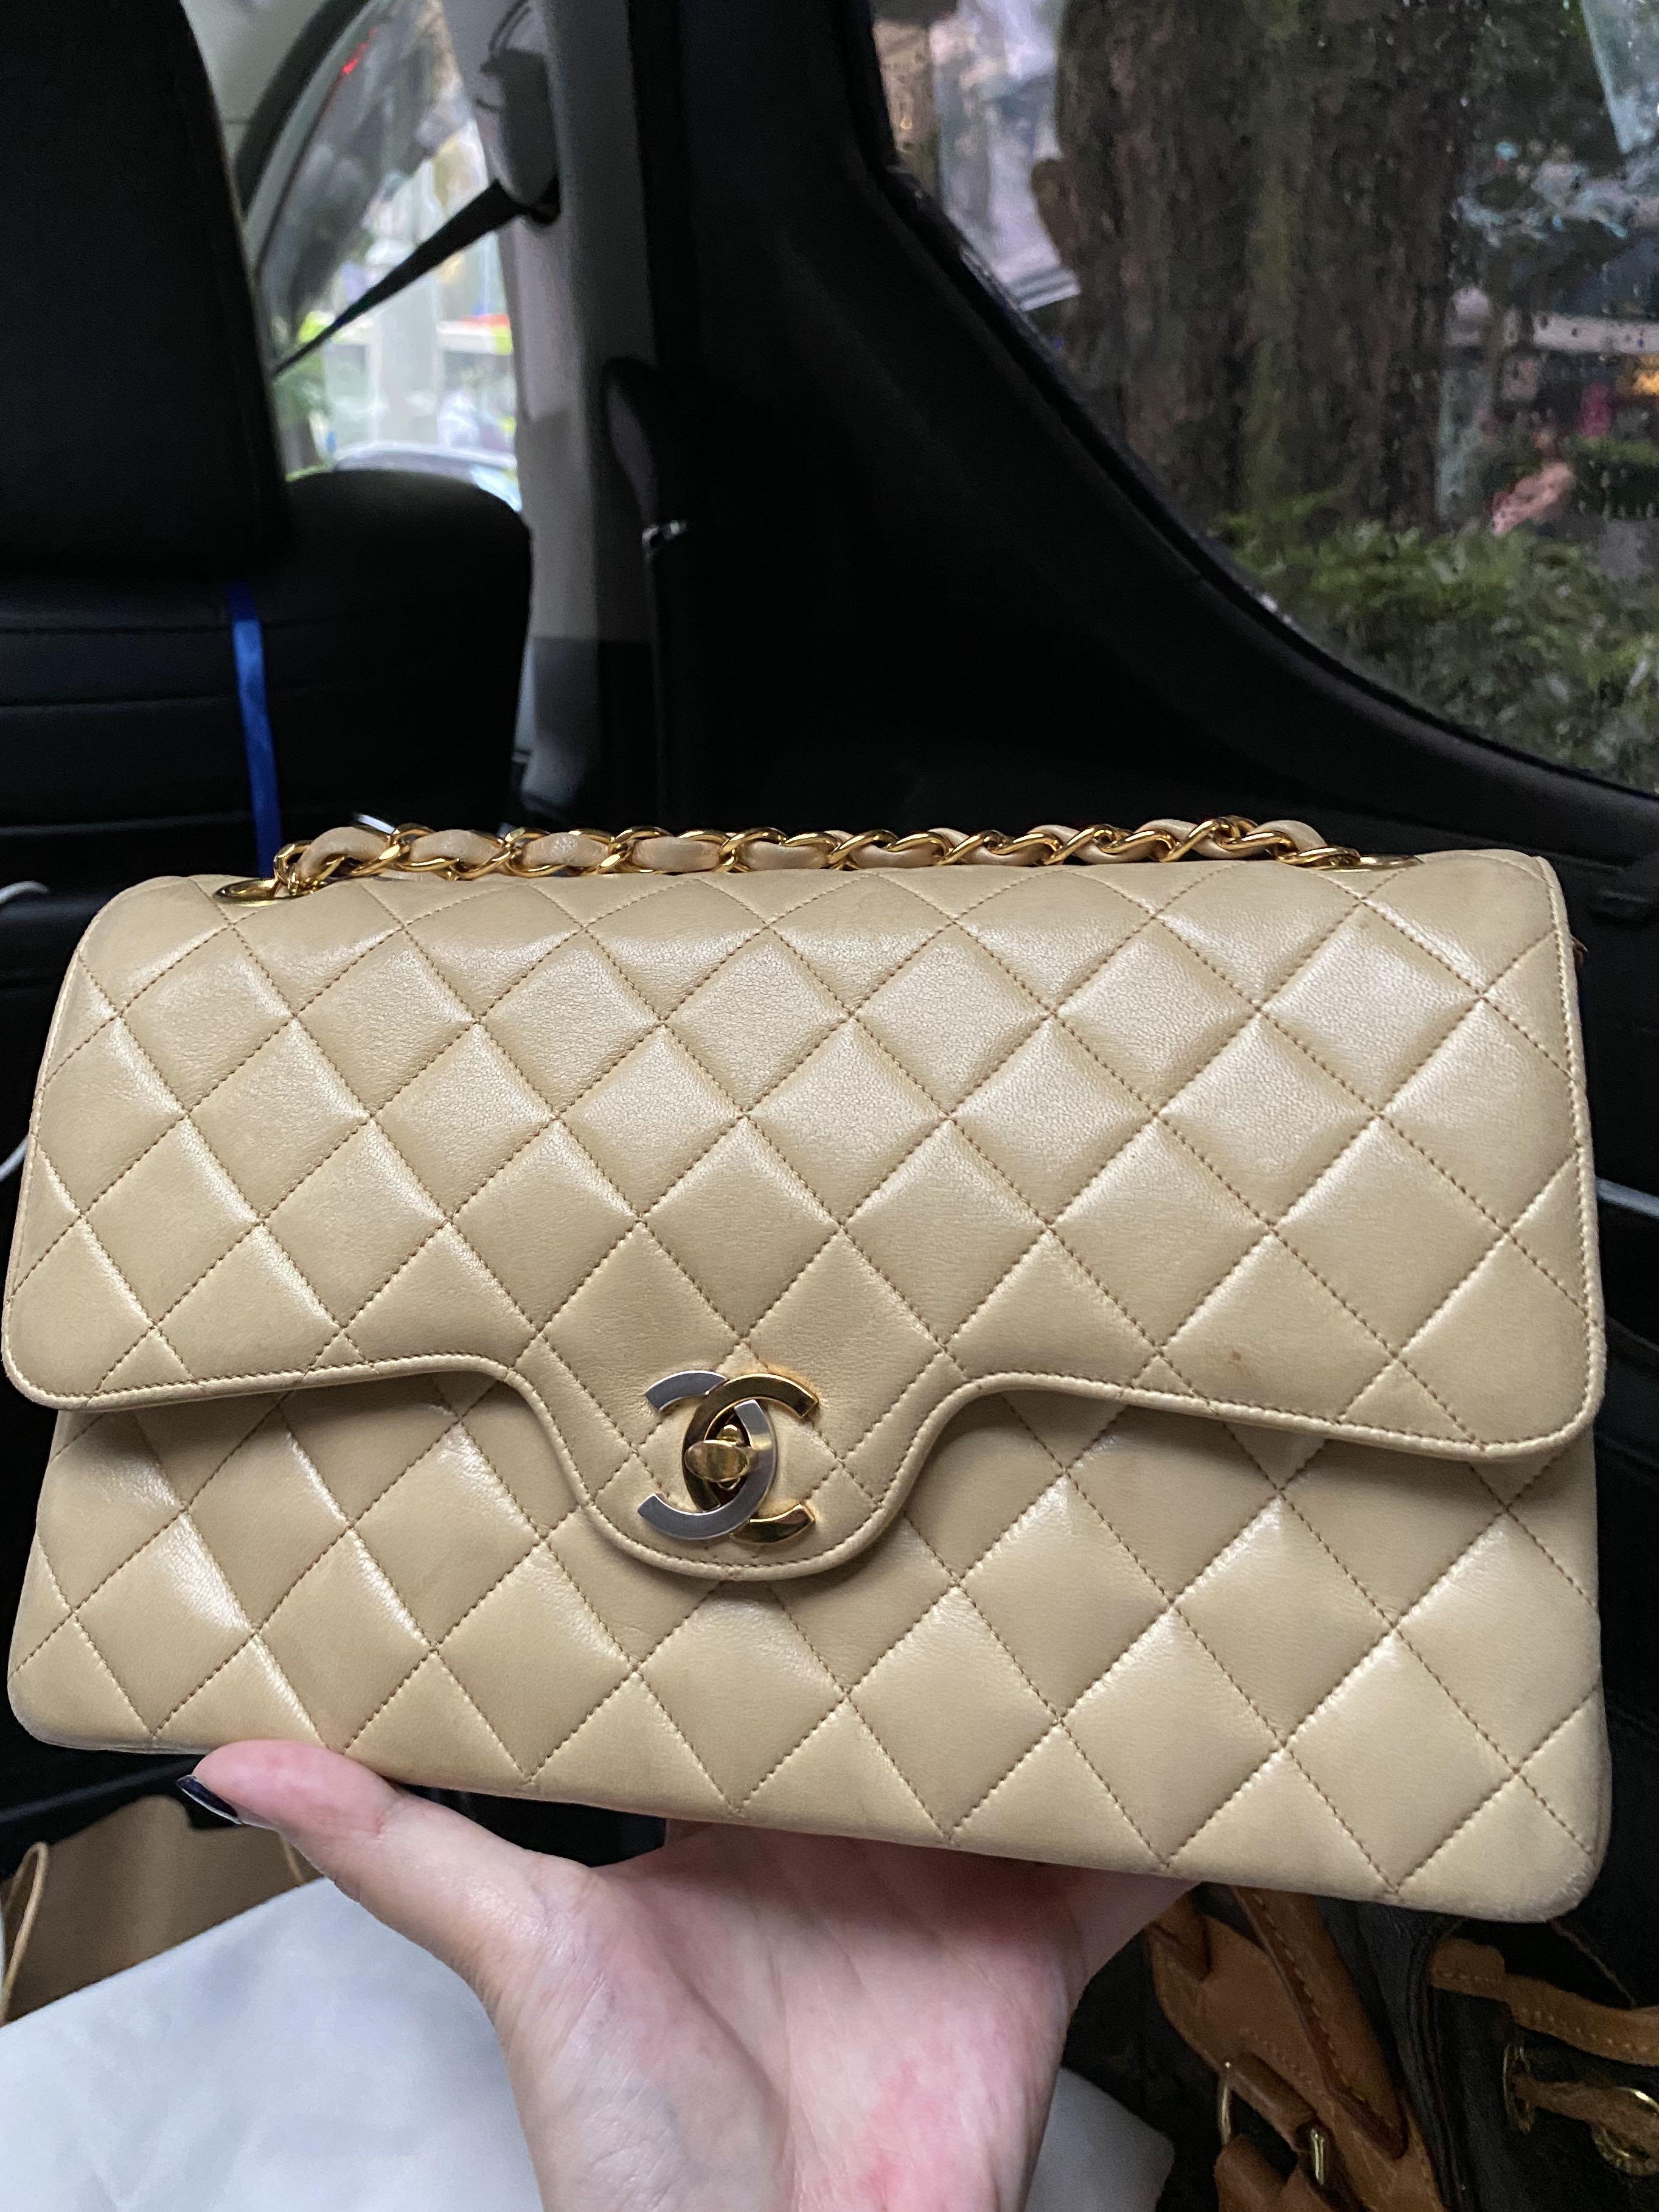 Chanel Vintage Paris limited edition two tone hardware classic